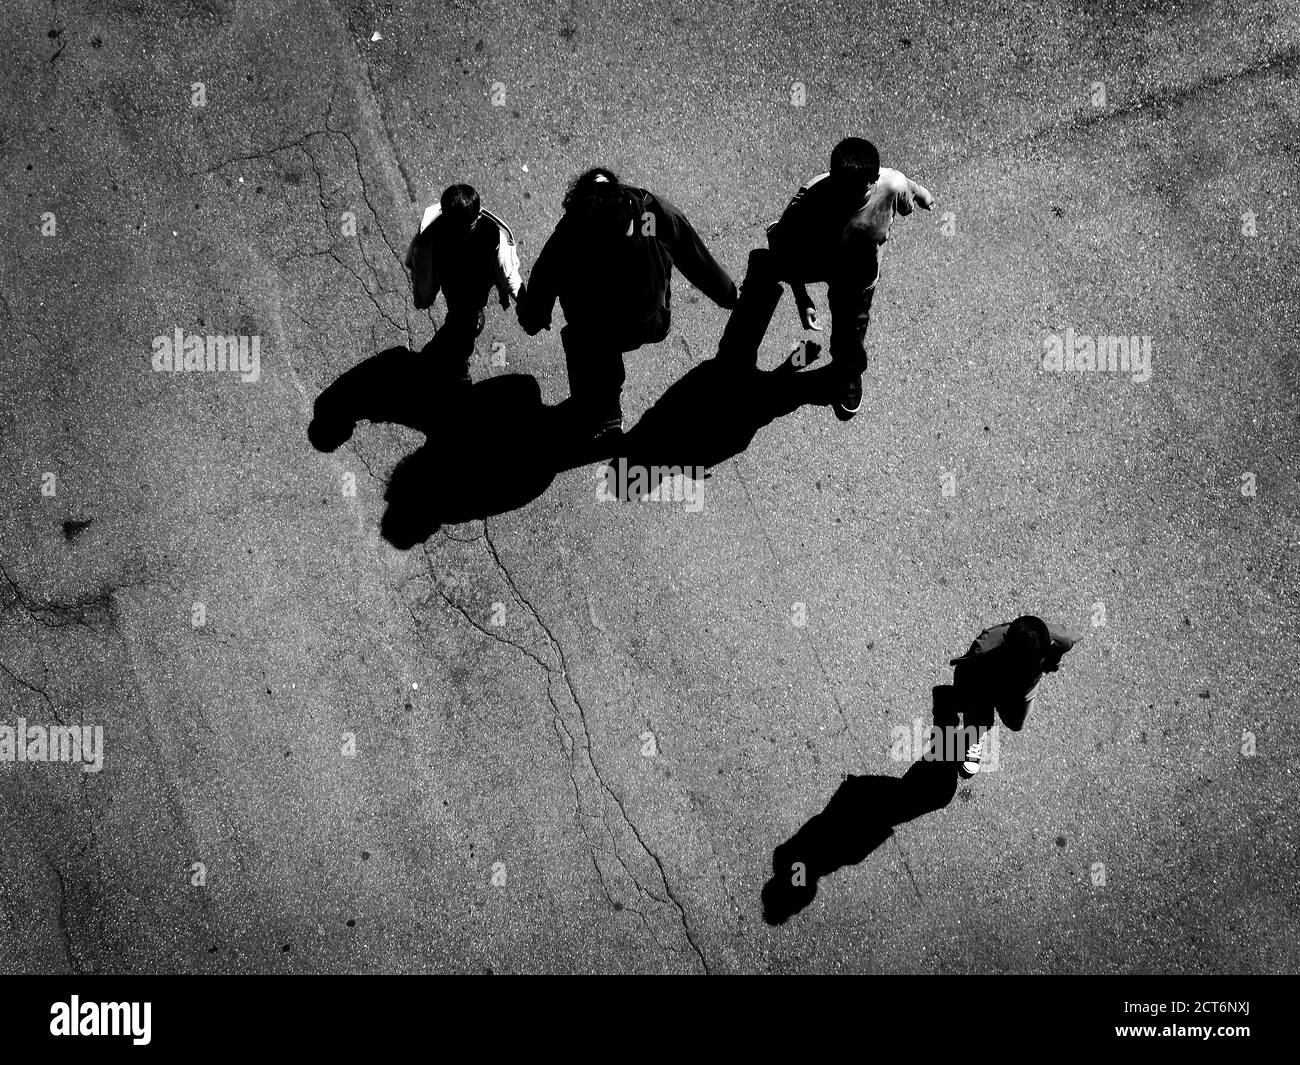 Several people walking down below on concrete with shadows aerial view from above Stock Photo